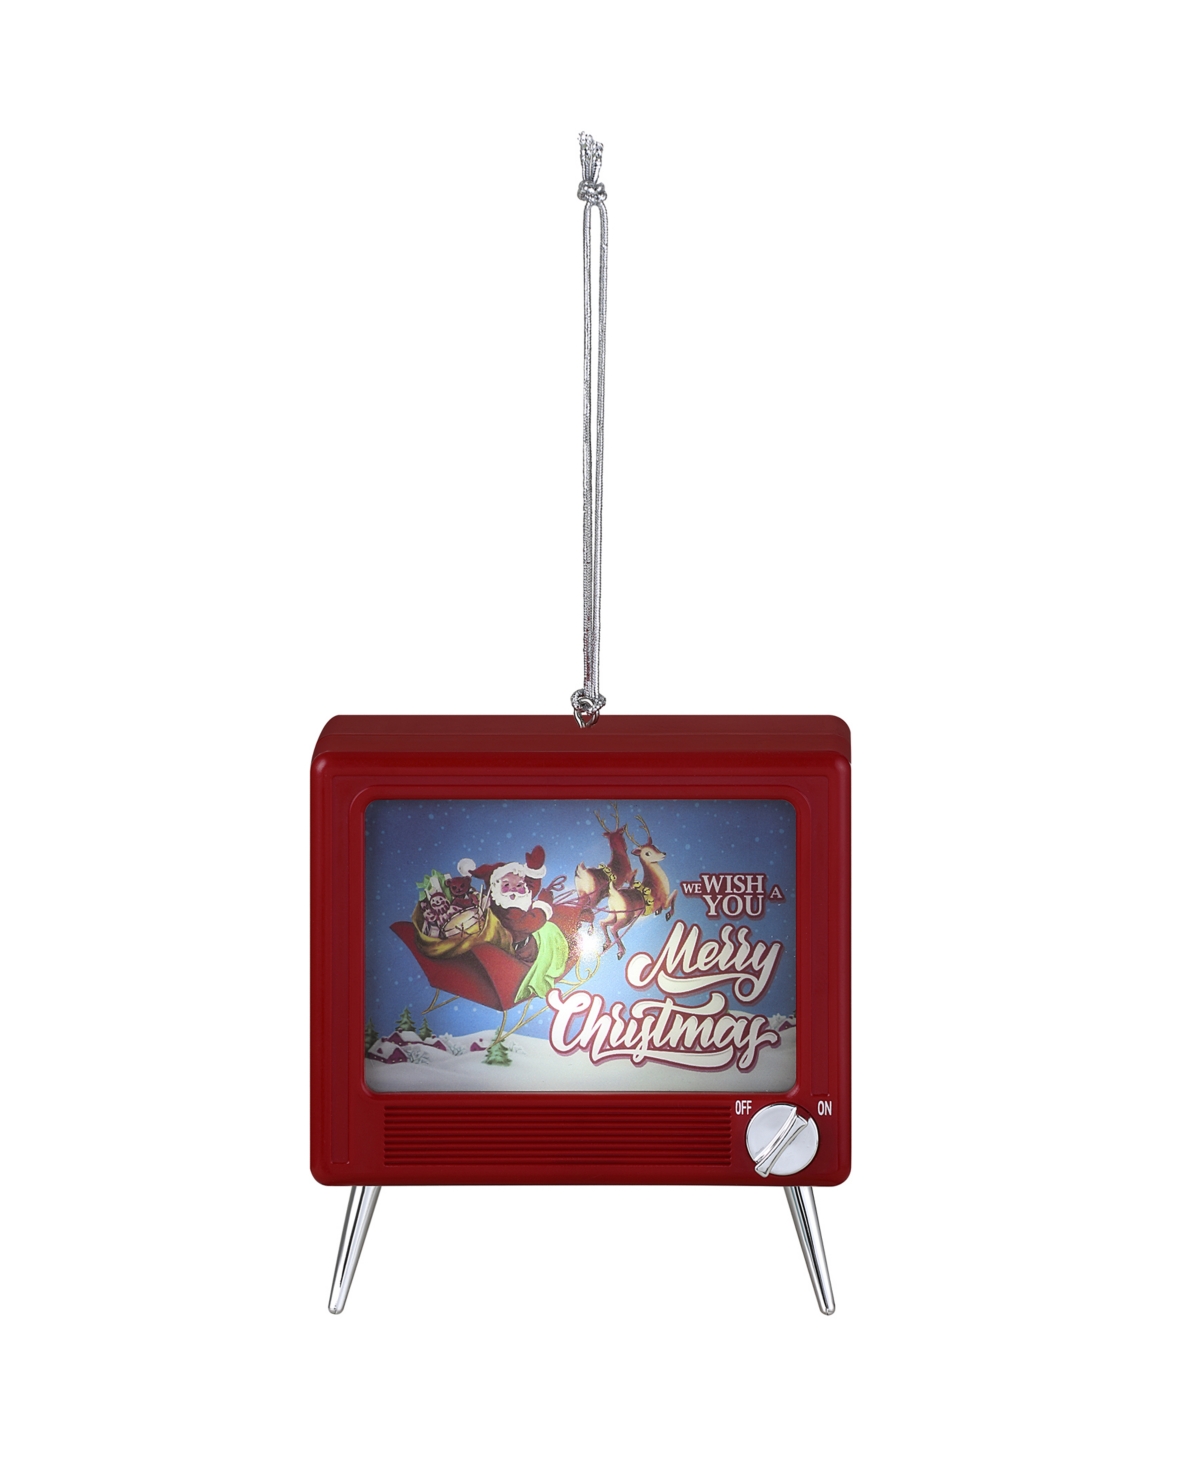 Mr. Christmas 3.75" Musical Led Tv Ornament In Red